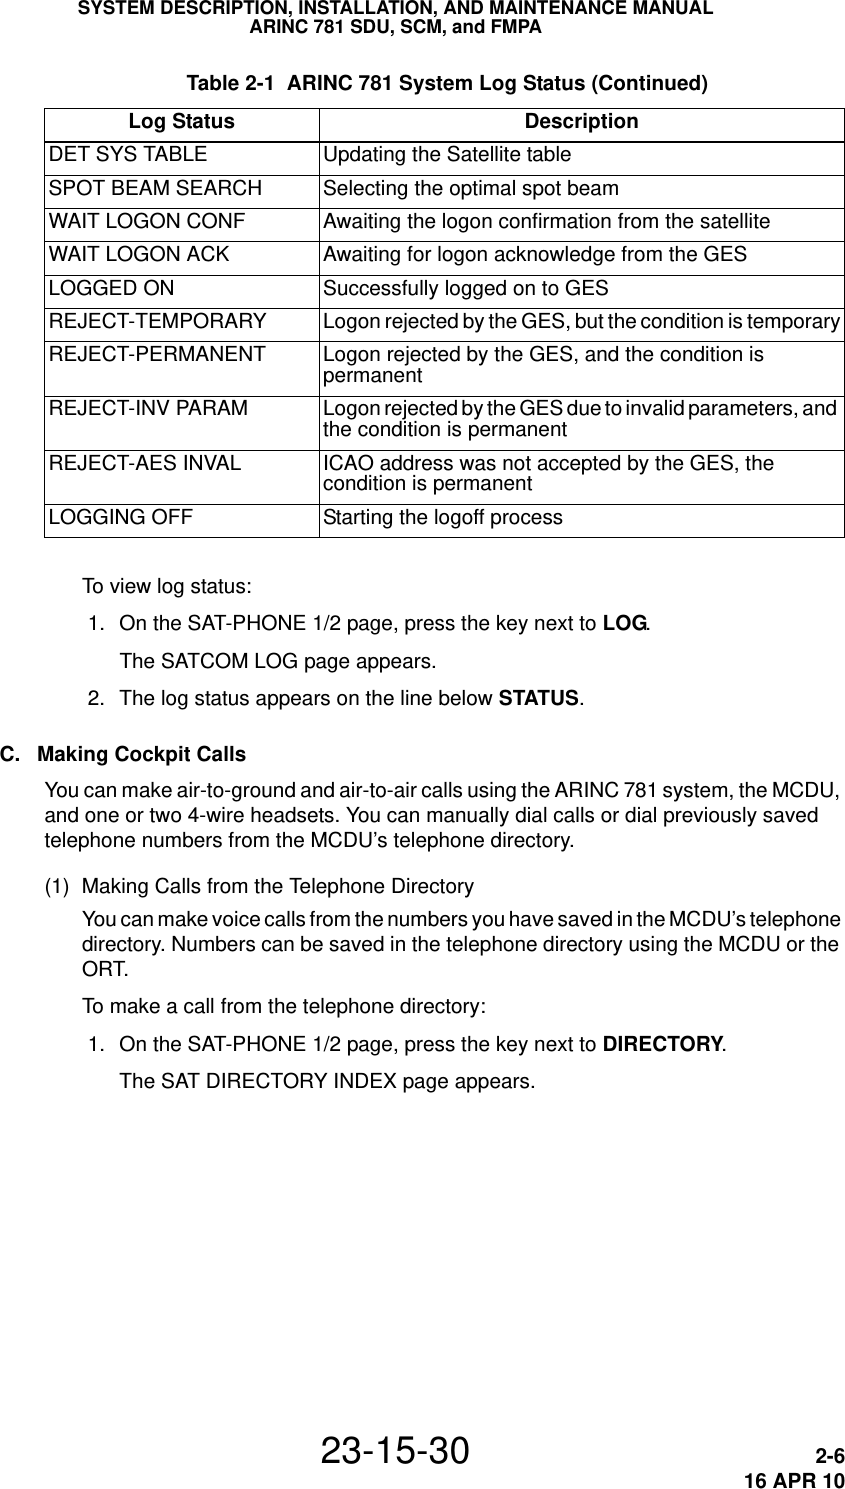 SYSTEM DESCRIPTION, INSTALLATION, AND MAINTENANCE MANUALARINC 781 SDU, SCM, and FMPA23-15-30 2-616 APR 10To view log status: 1. On the SAT-PHONE 1/2 page, press the key next to LOG.The SATCOM LOG page appears. 2. The log status appears on the line below STATUS. C. Making Cockpit CallsYou can make air-to-ground and air-to-air calls using the ARINC 781 system, the MCDU, and one or two 4-wire headsets. You can manually dial calls or dial previously saved telephone numbers from the MCDU’s telephone directory.(1) Making Calls from the Telephone DirectoryYou can make voice calls from the numbers you have saved in the MCDU’s telephone directory. Numbers can be saved in the telephone directory using the MCDU or the ORT.To make a call from the telephone directory: 1. On the SAT-PHONE 1/2 page, press the key next to DIRECTORY.The SAT DIRECTORY INDEX page appears.DET SYS TABLE Updating the Satellite tableSPOT BEAM SEARCH Selecting the optimal spot beamWAIT LOGON CONF Awaiting the logon confirmation from the satelliteWAIT LOGON ACK Awaiting for logon acknowledge from the GESLOGGED ON Successfully logged on to GESREJECT-TEMPORARY Logon rejected by the GES, but the condition is temporaryREJECT-PERMANENT Logon rejected by the GES, and the condition is permanentREJECT-INV PARAM Logon rejected by the GES due to invalid parameters, and the condition is permanentREJECT-AES INVAL ICAO address was not accepted by the GES, the condition is permanentLOGGING OFF Starting the logoff process Table 2-1  ARINC 781 System Log Status (Continued)Log Status Description